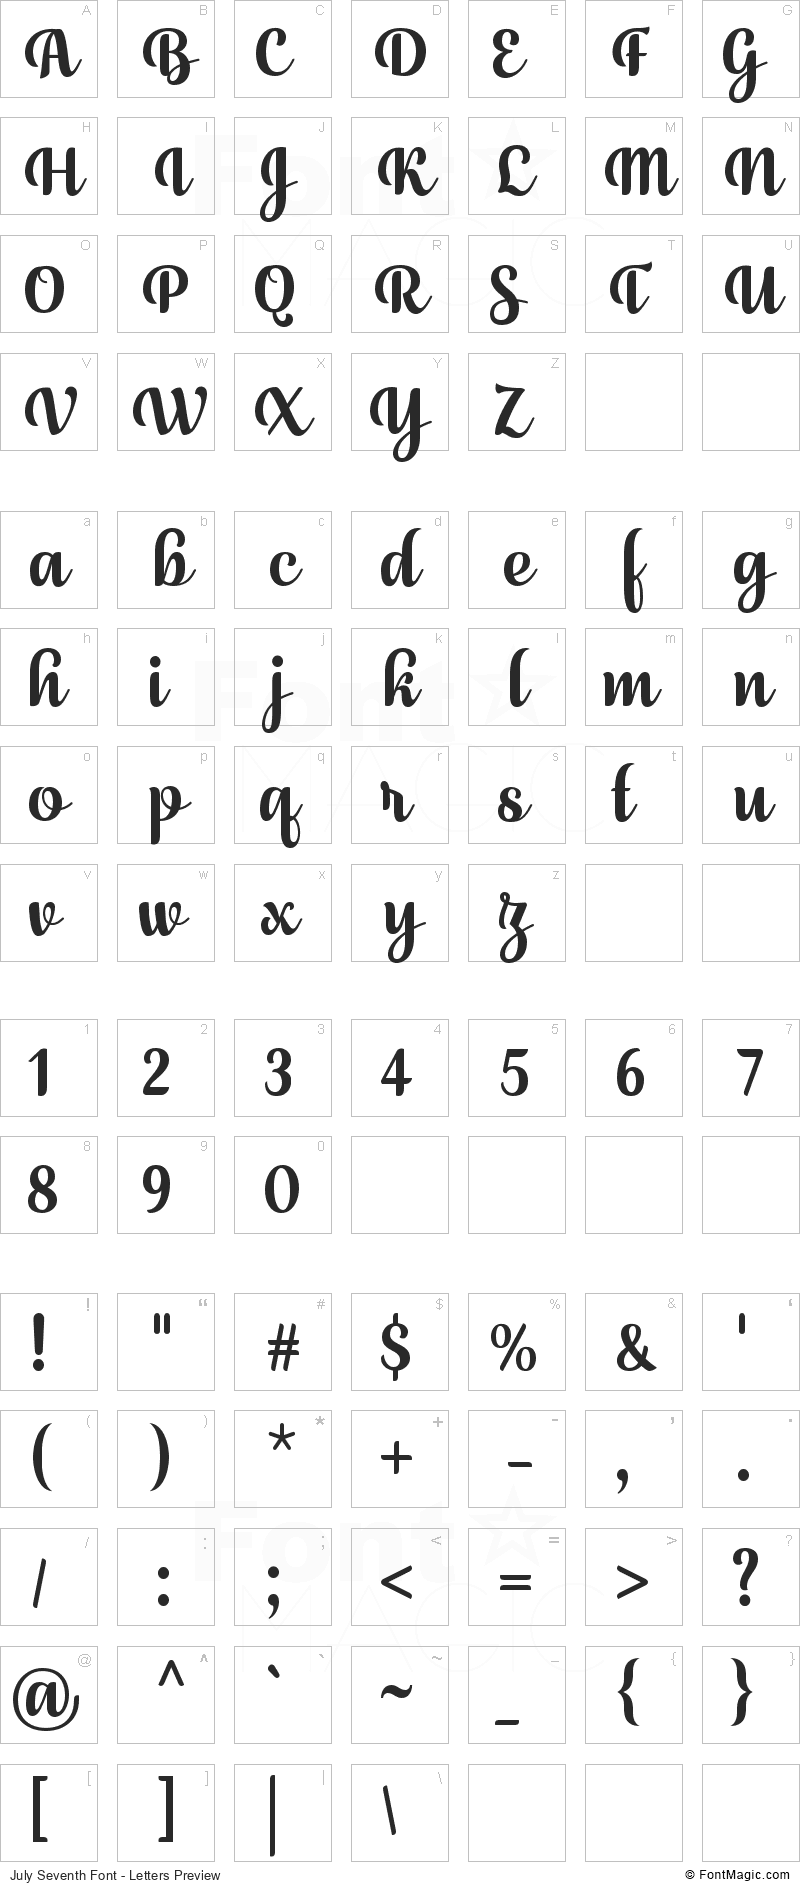 July Seventh Font - All Latters Preview Chart